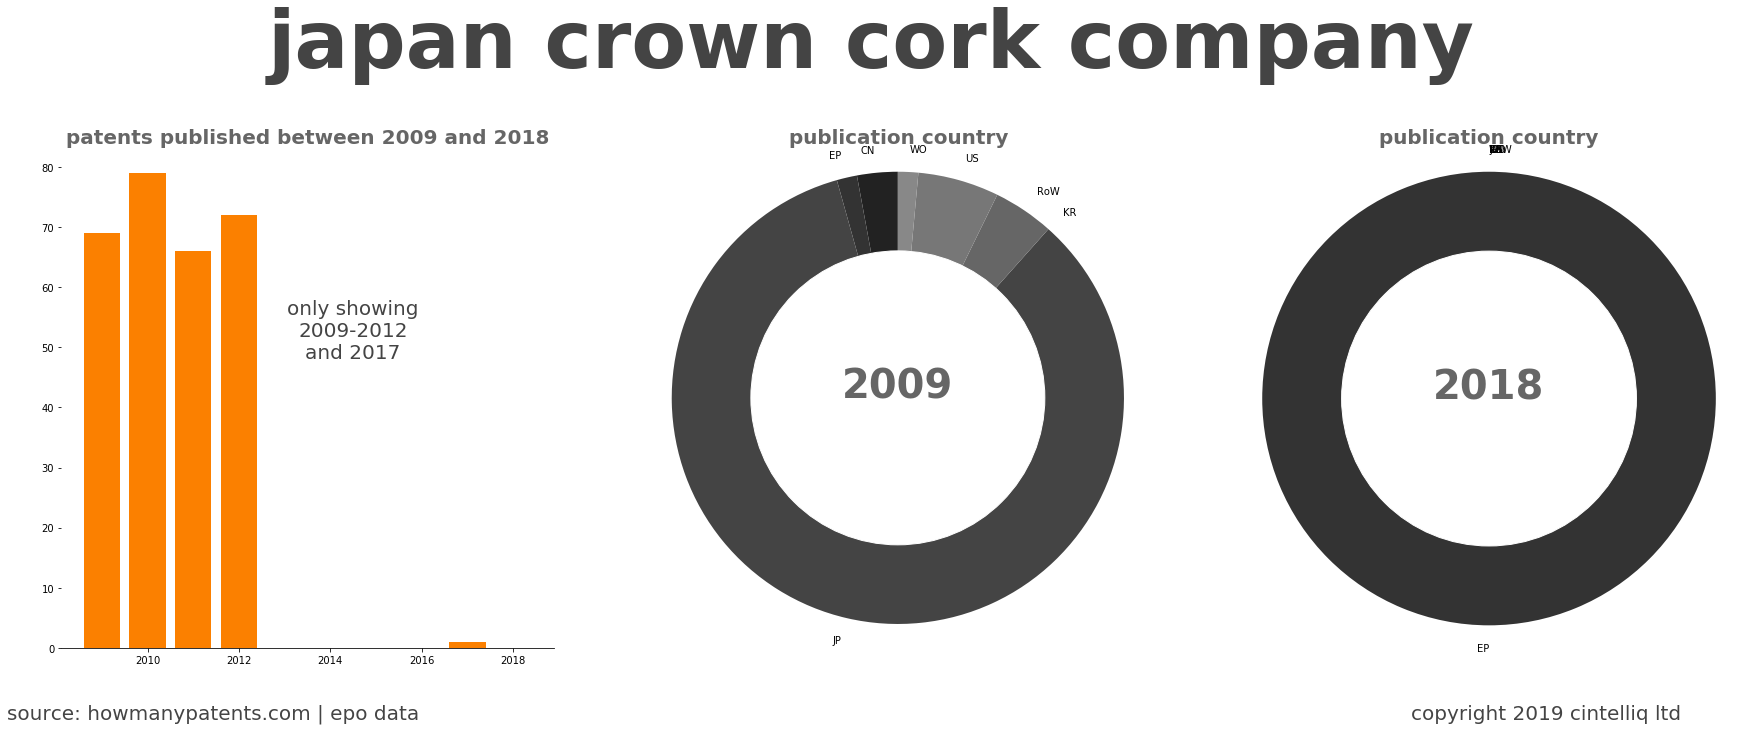 summary of patents for Japan Crown Cork Company